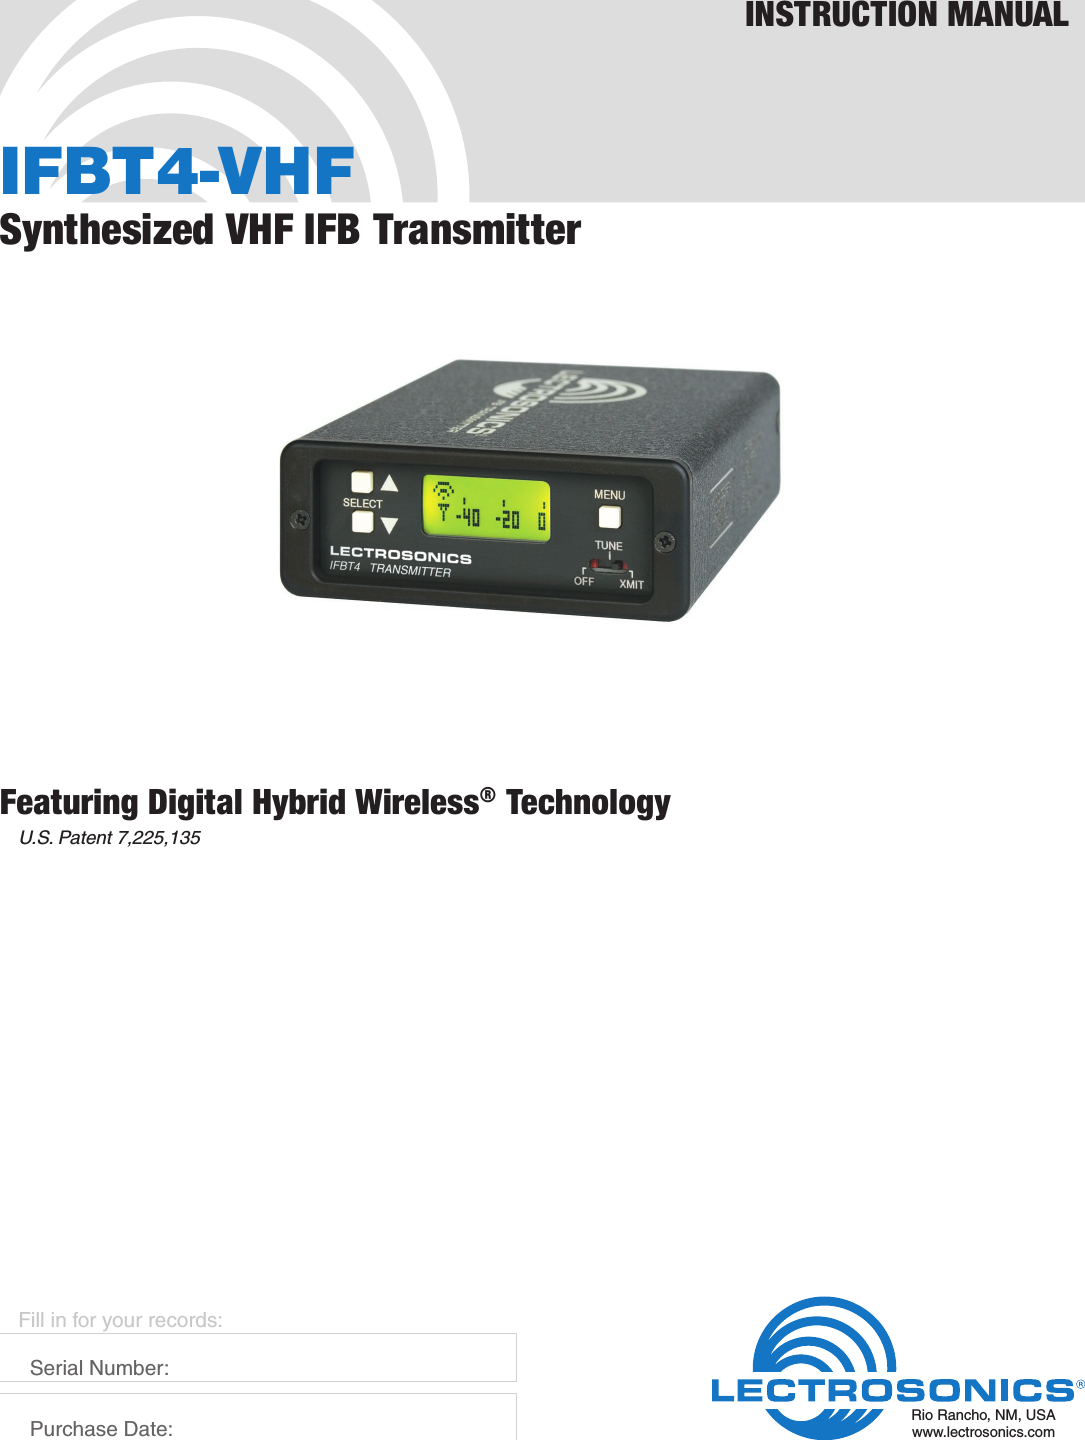 IFBT4-VHFSynthesized VHF IFB TransmitterINSTRUCTION MANUALRio Rancho, NM, USAwww.lectrosonics.comFill in for your records:  Serial Number:  Purchase Date:Featuring Digital Hybrid Wireless® TechnologyU.S. Patent 7,225,135